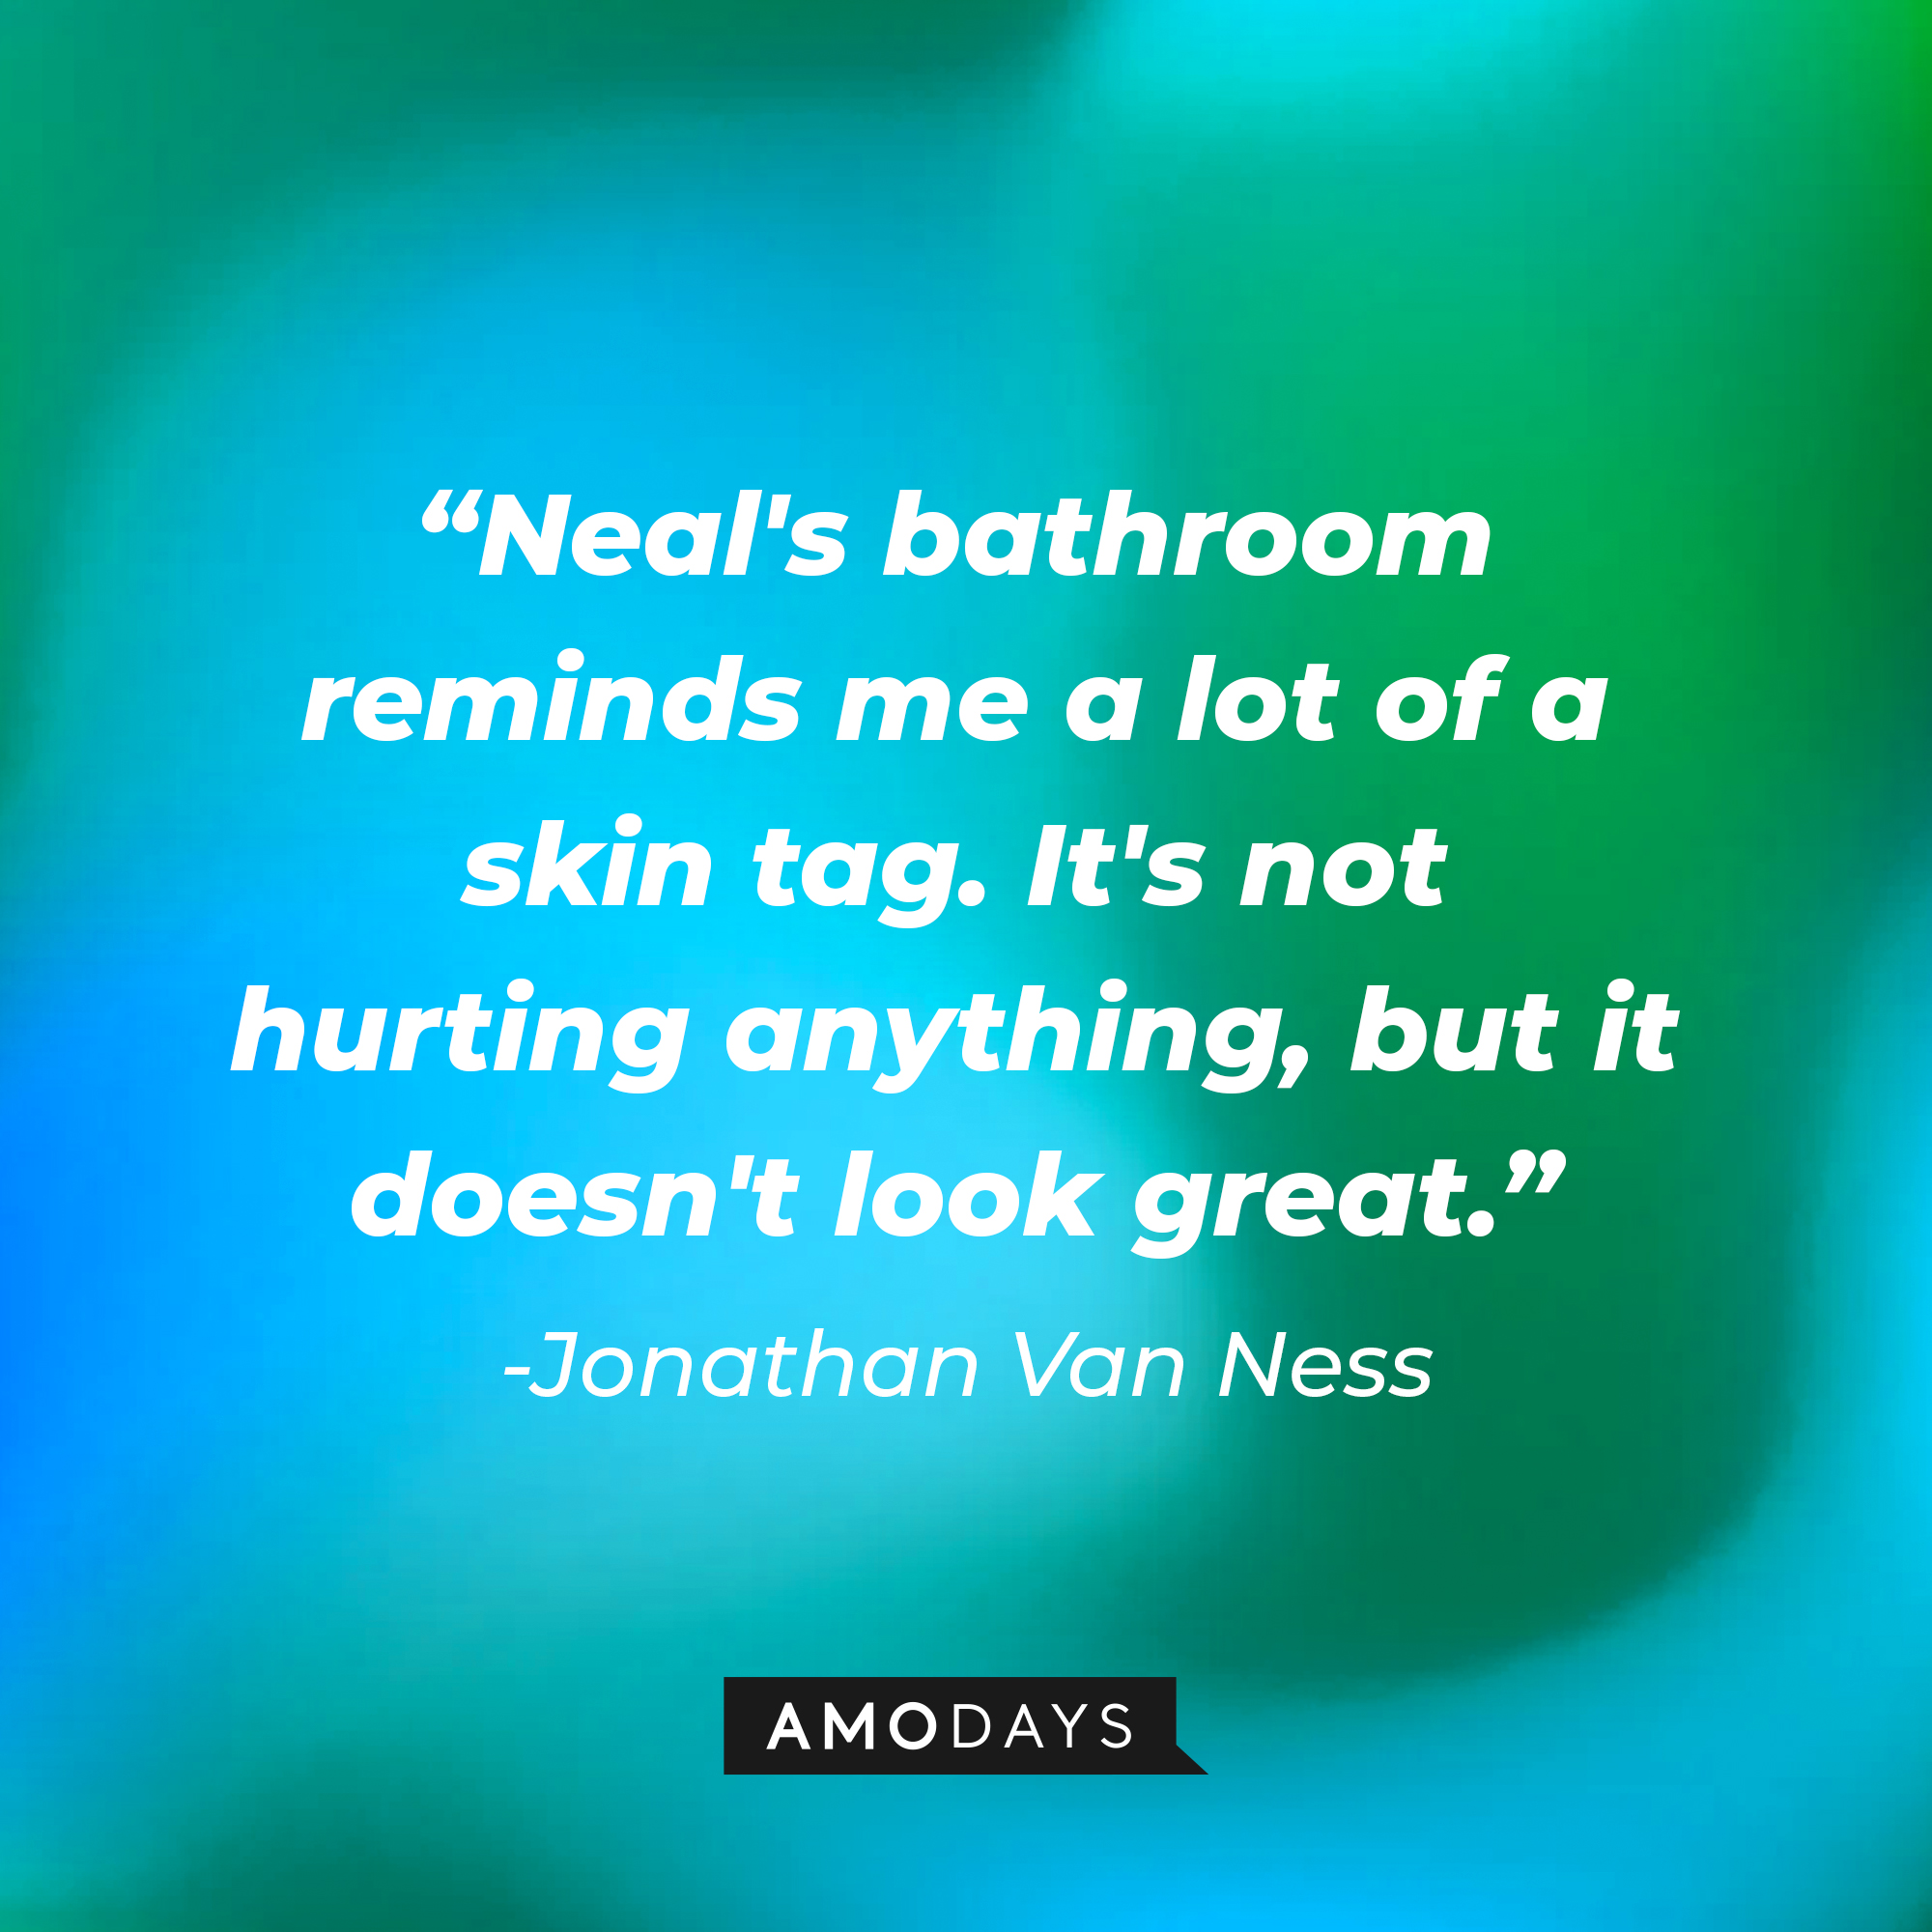 Jonathan Van Ness’ quote: "Neal's bathroom reminds me a lot of a skin tag. It's not hurting anything, but it doesn't look great." | Image: AmoDays